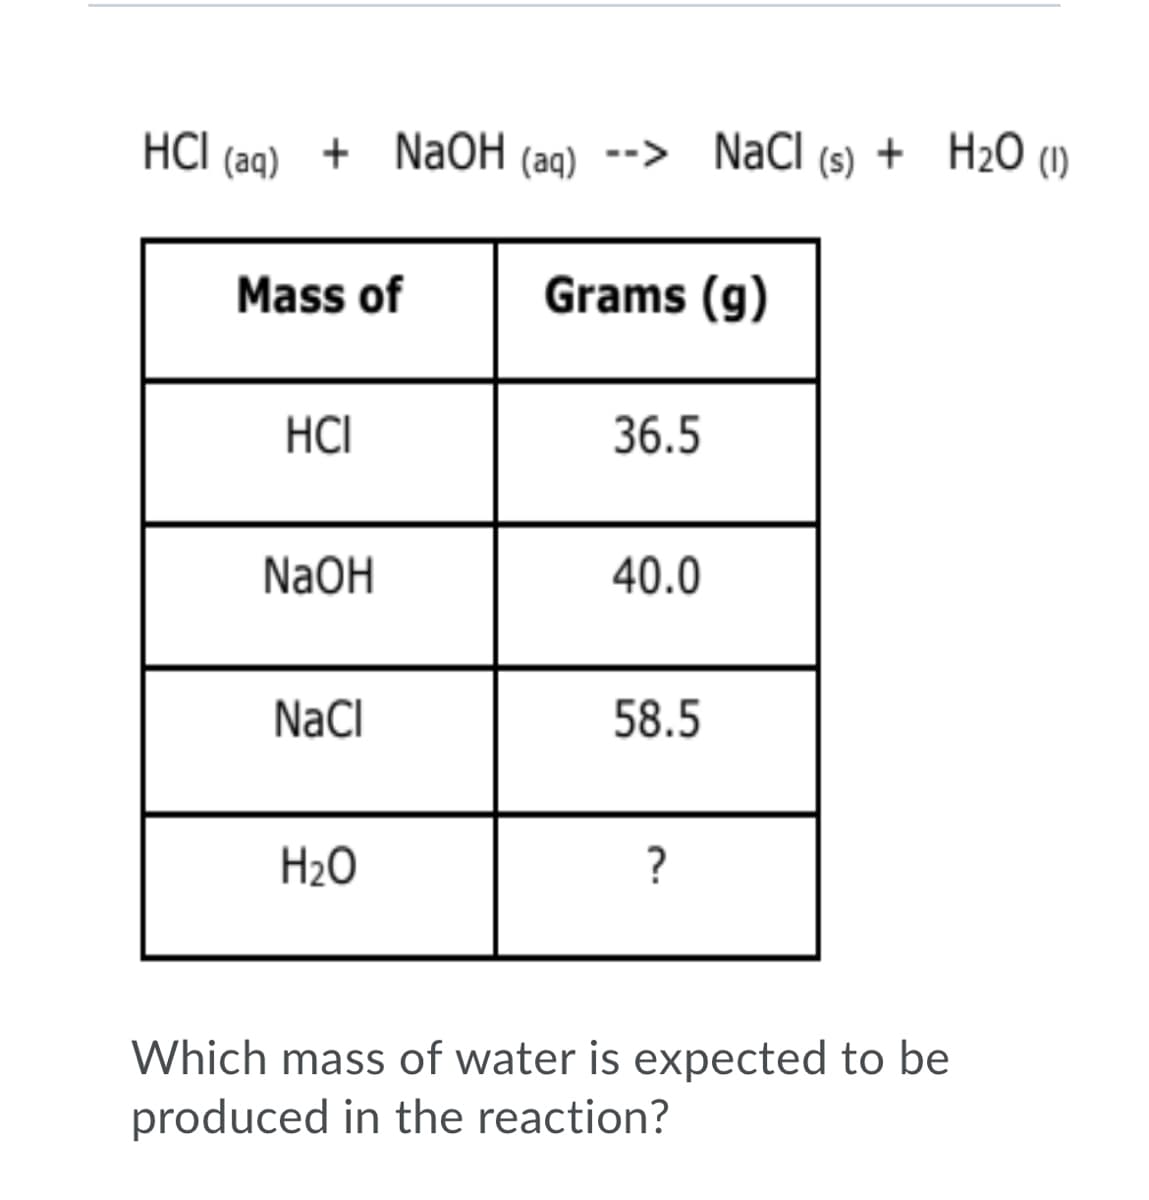 HCI (aq) + H2O (1)
NaOH (aq) --> NaCl (s) +
Mass of
Grams (g)
HCI
36.5
NaOH
40.0
NaCI
58.5
H2O
?
Which mass of water is expected to be
produced in the reaction?
